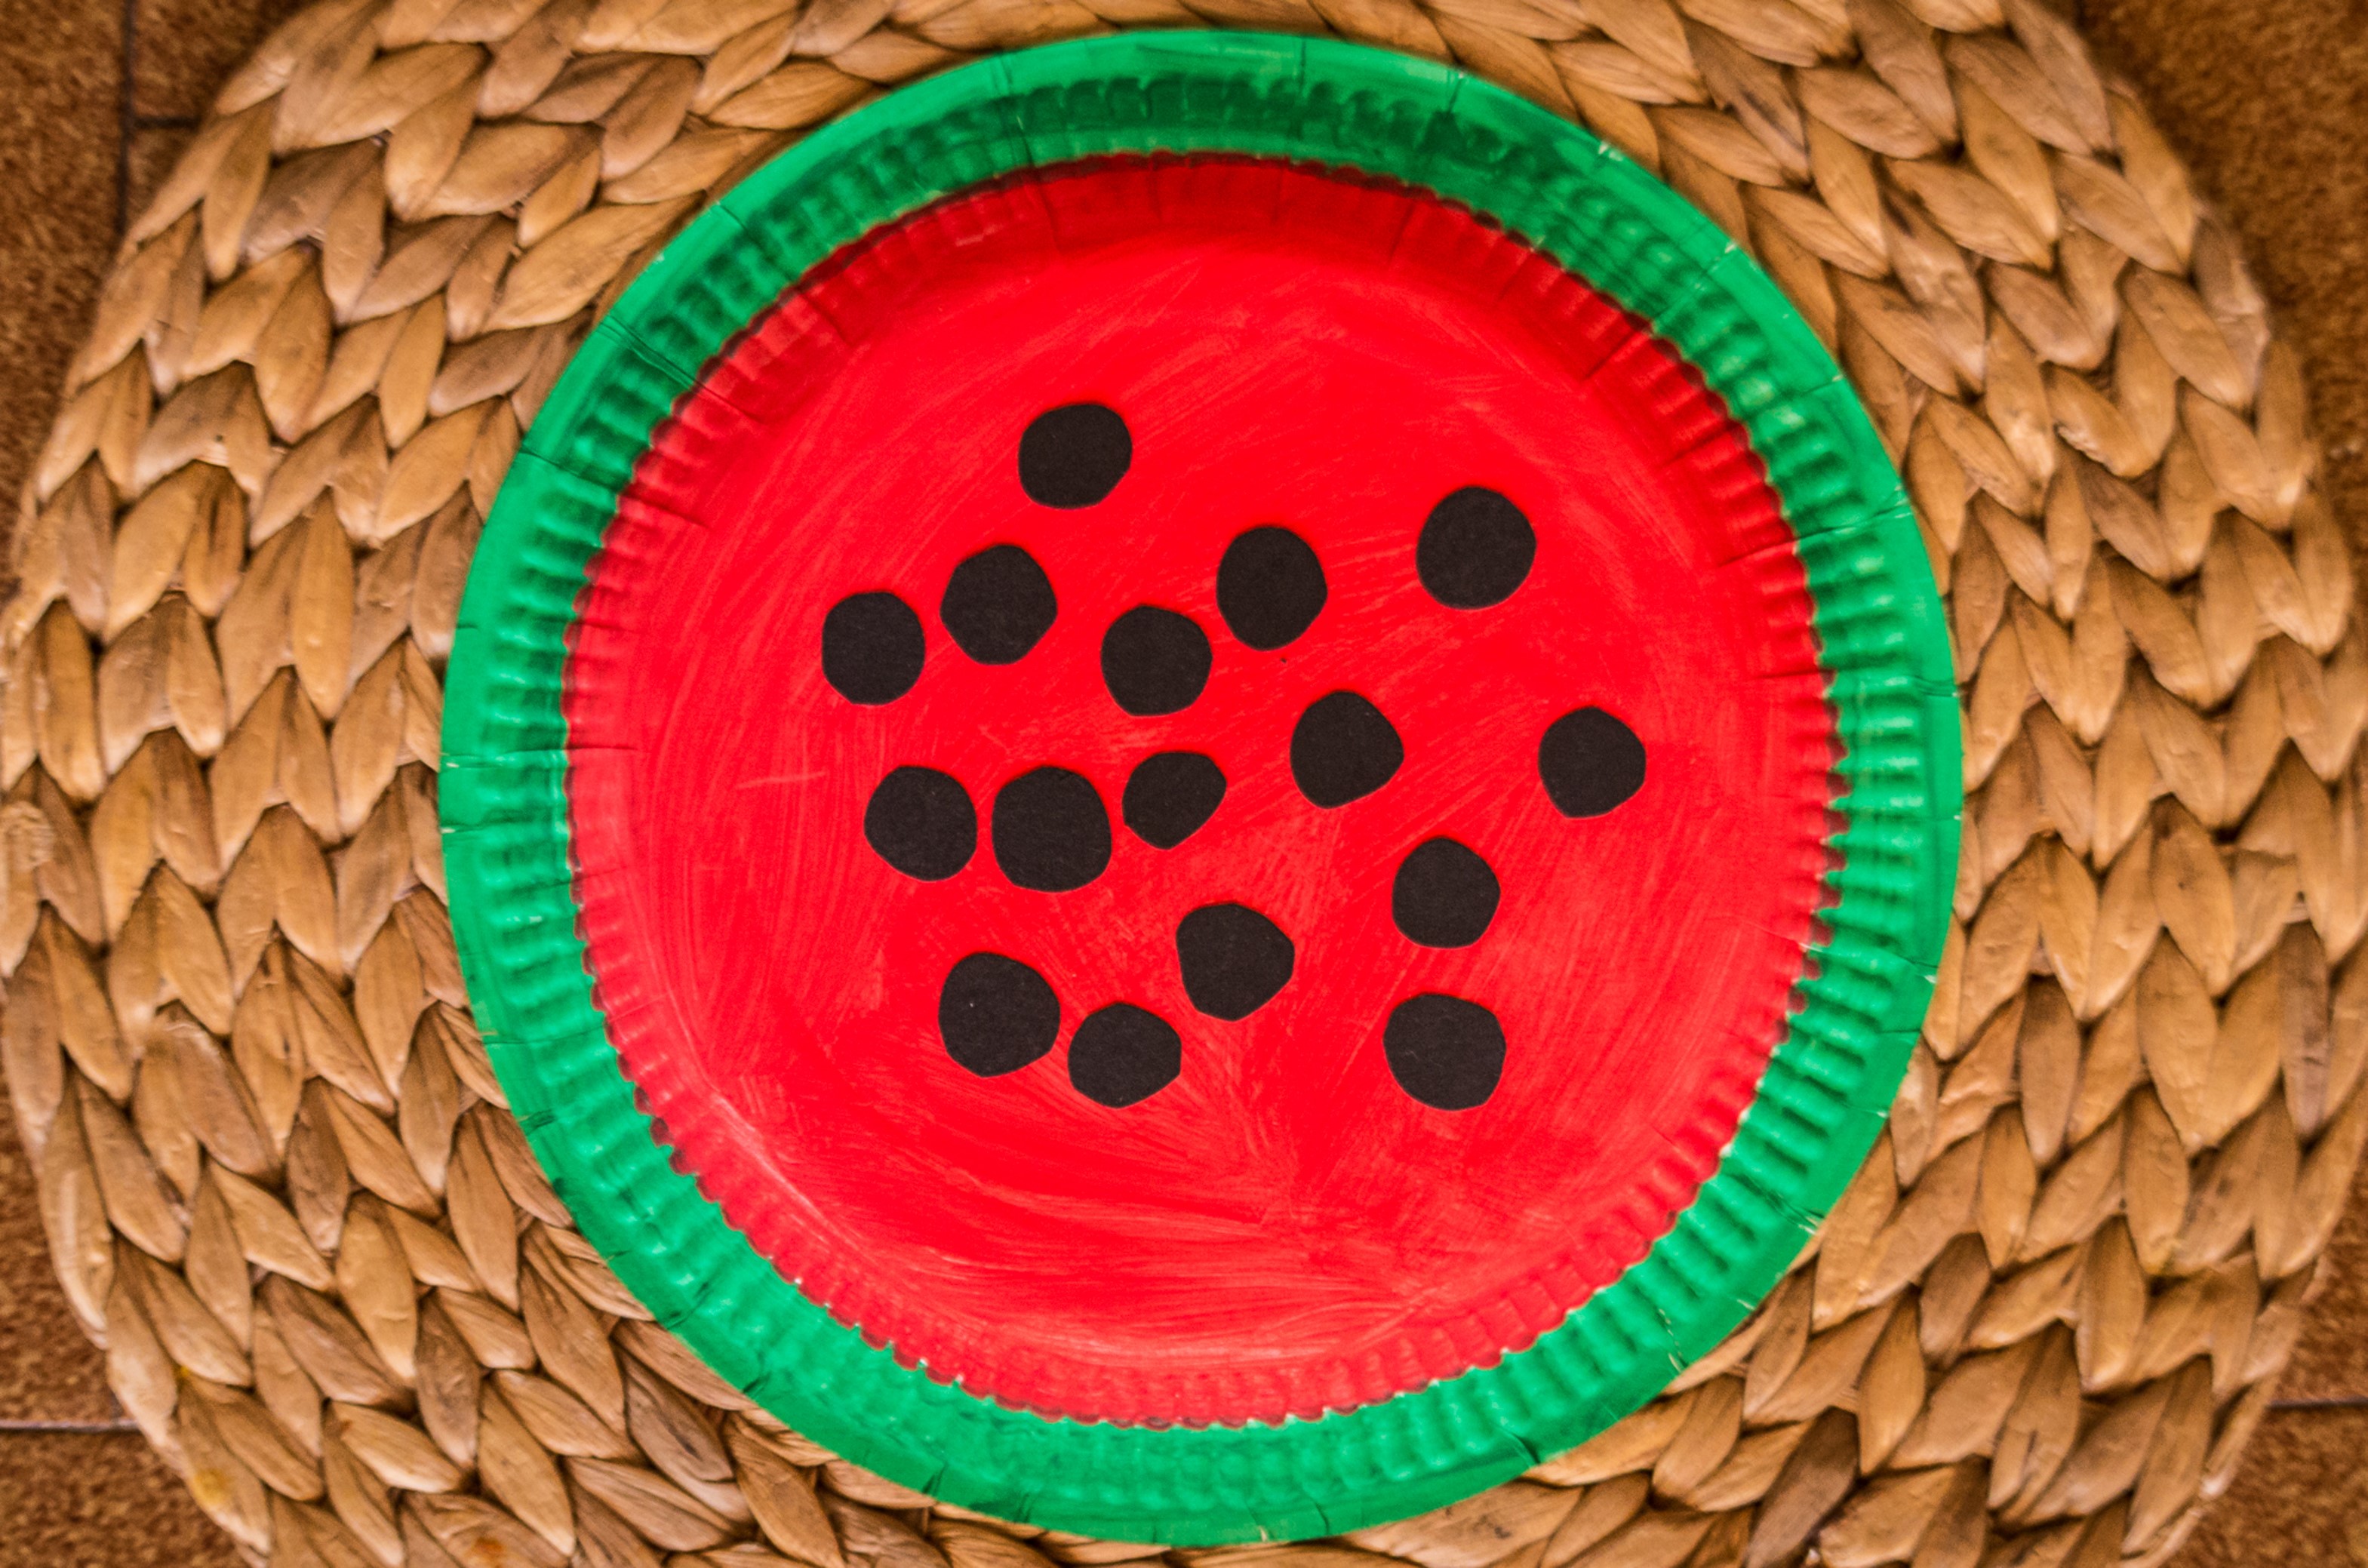 Completed Craft: Whole watermelon 